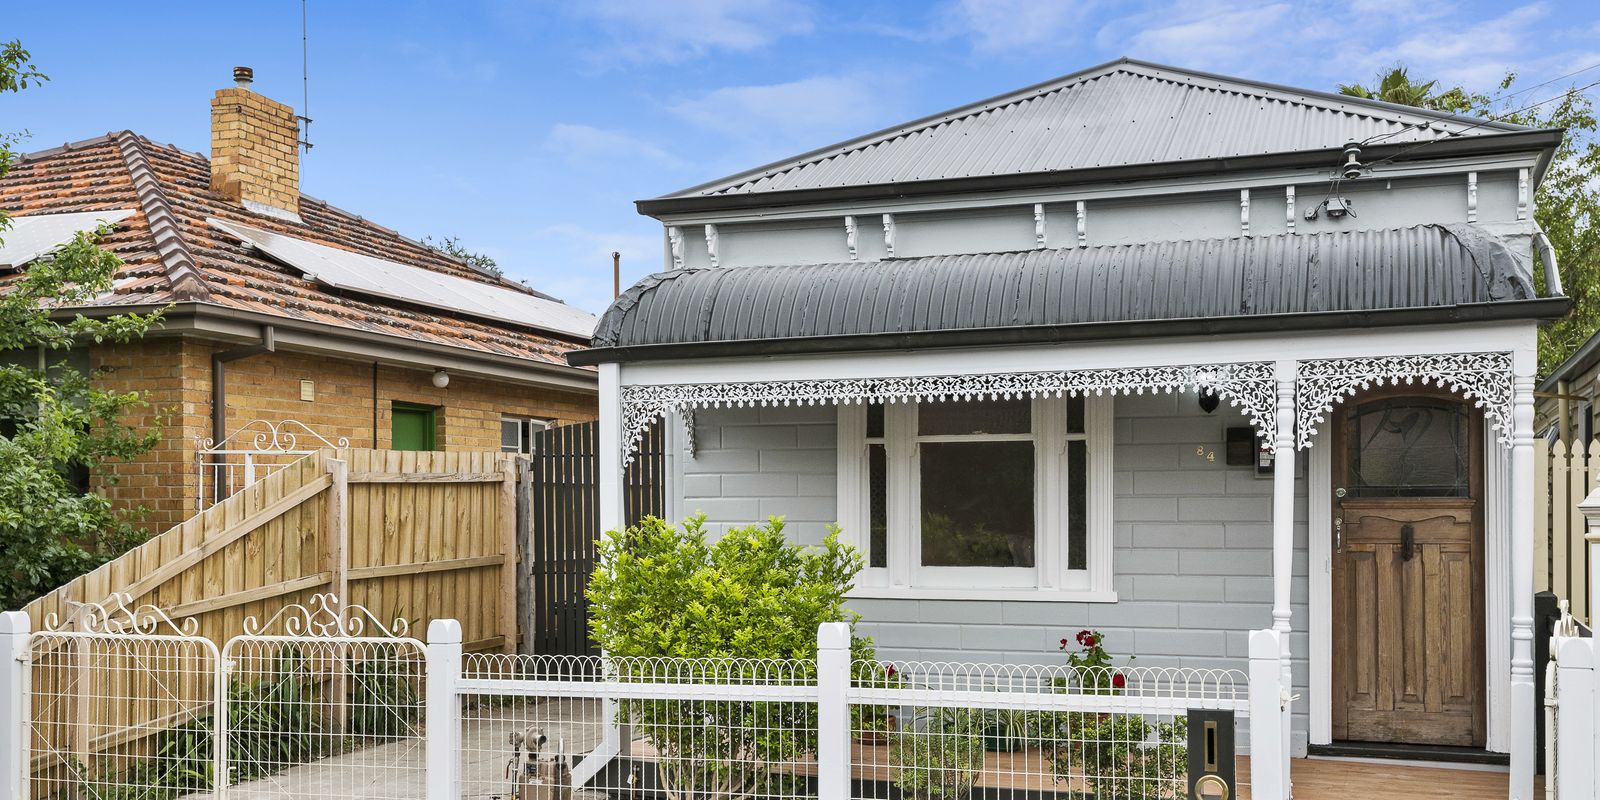 What can you buy for $500,000 in Melbourne?